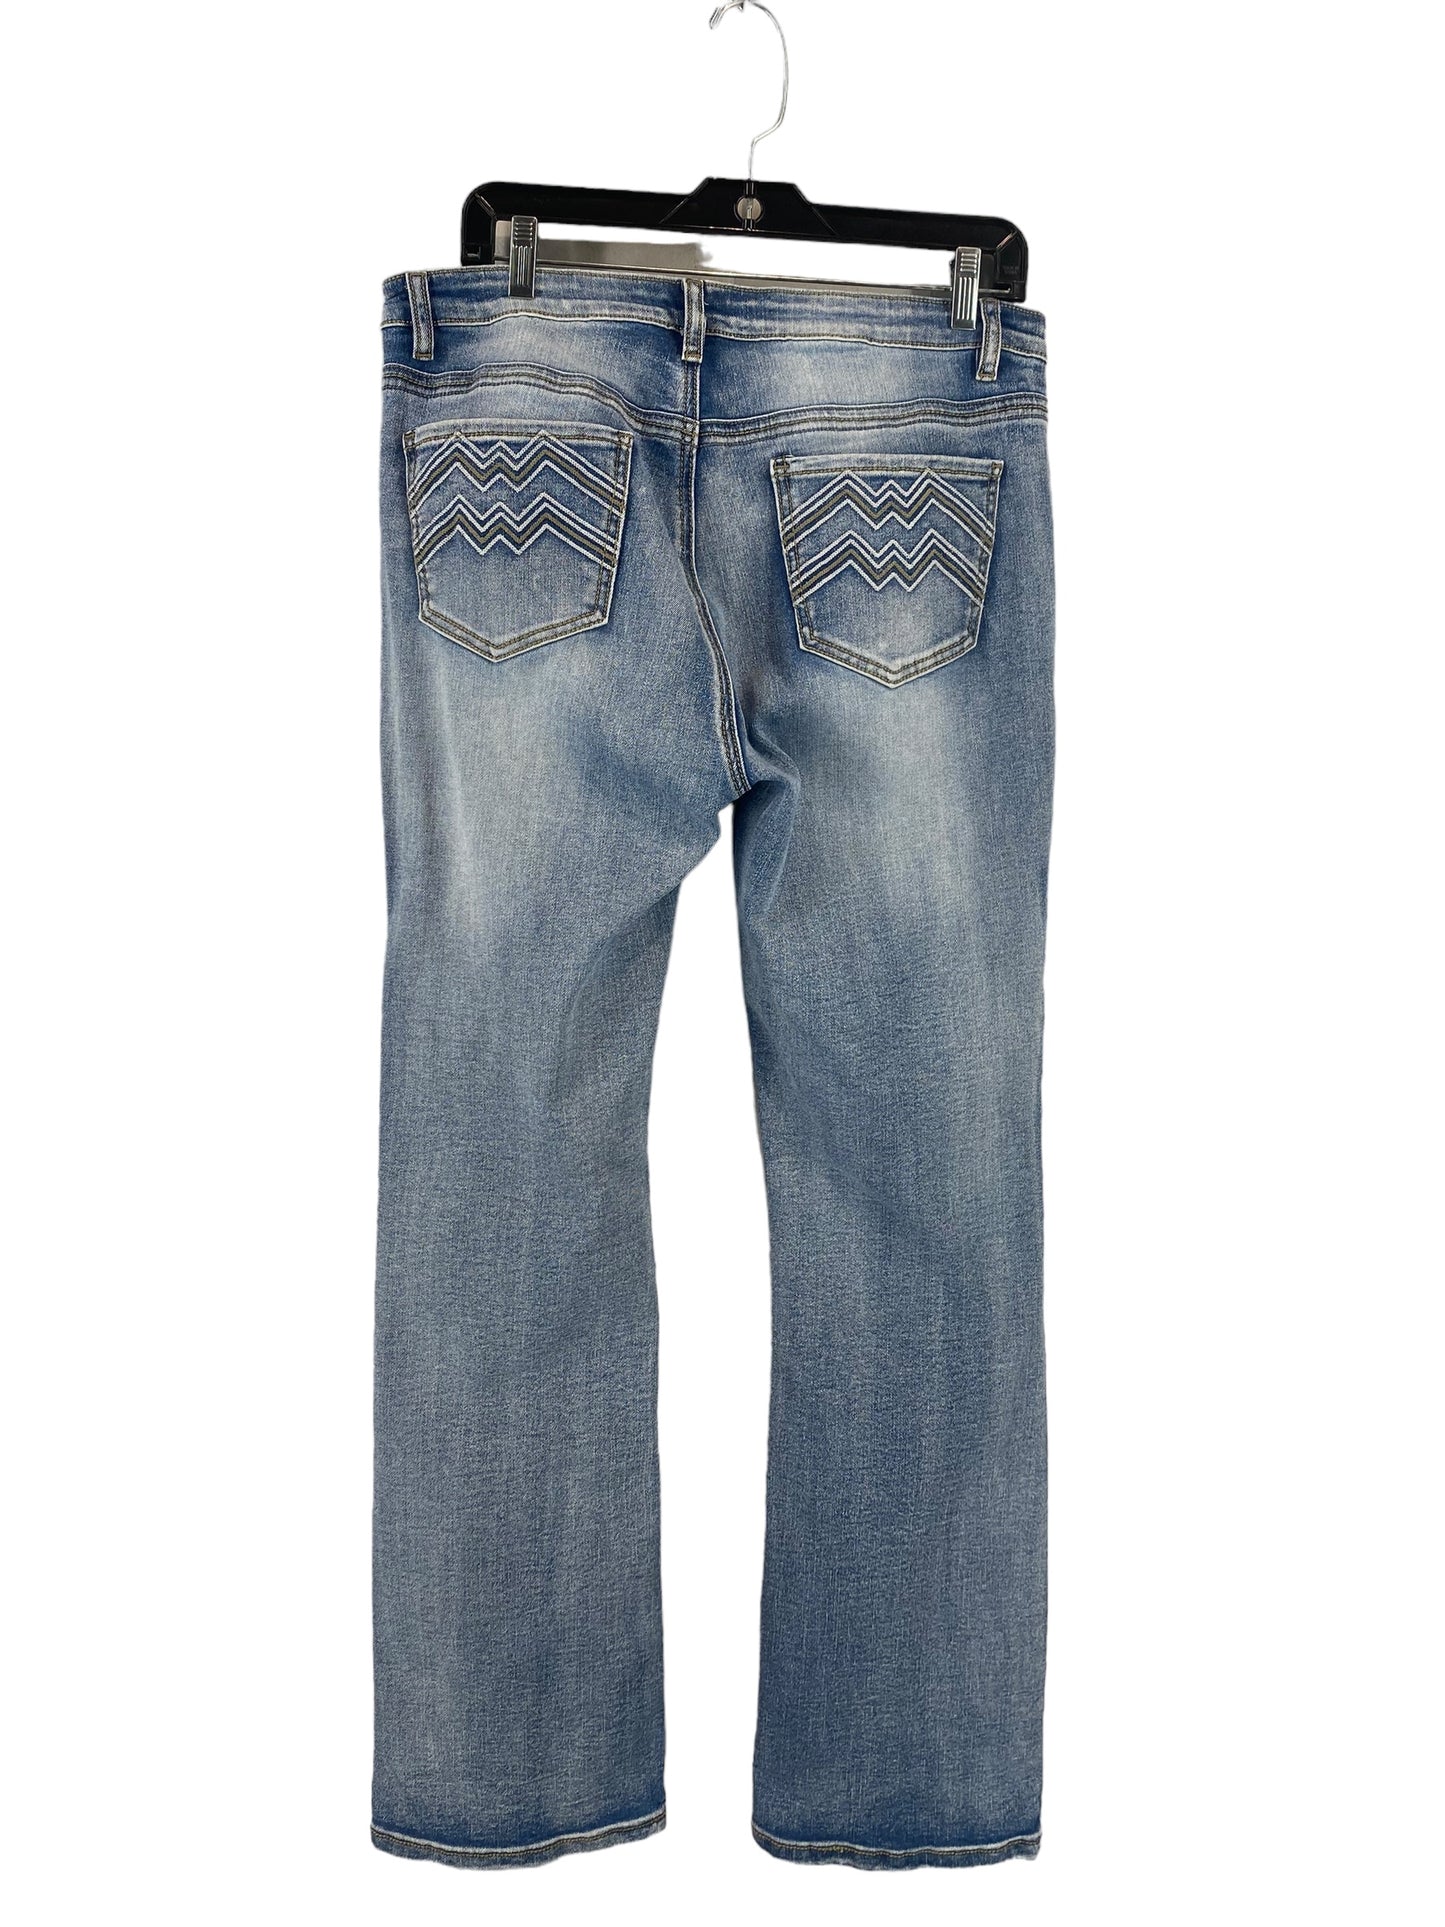 Jeans Boot Cut By Clothes Mentor  Size: 16